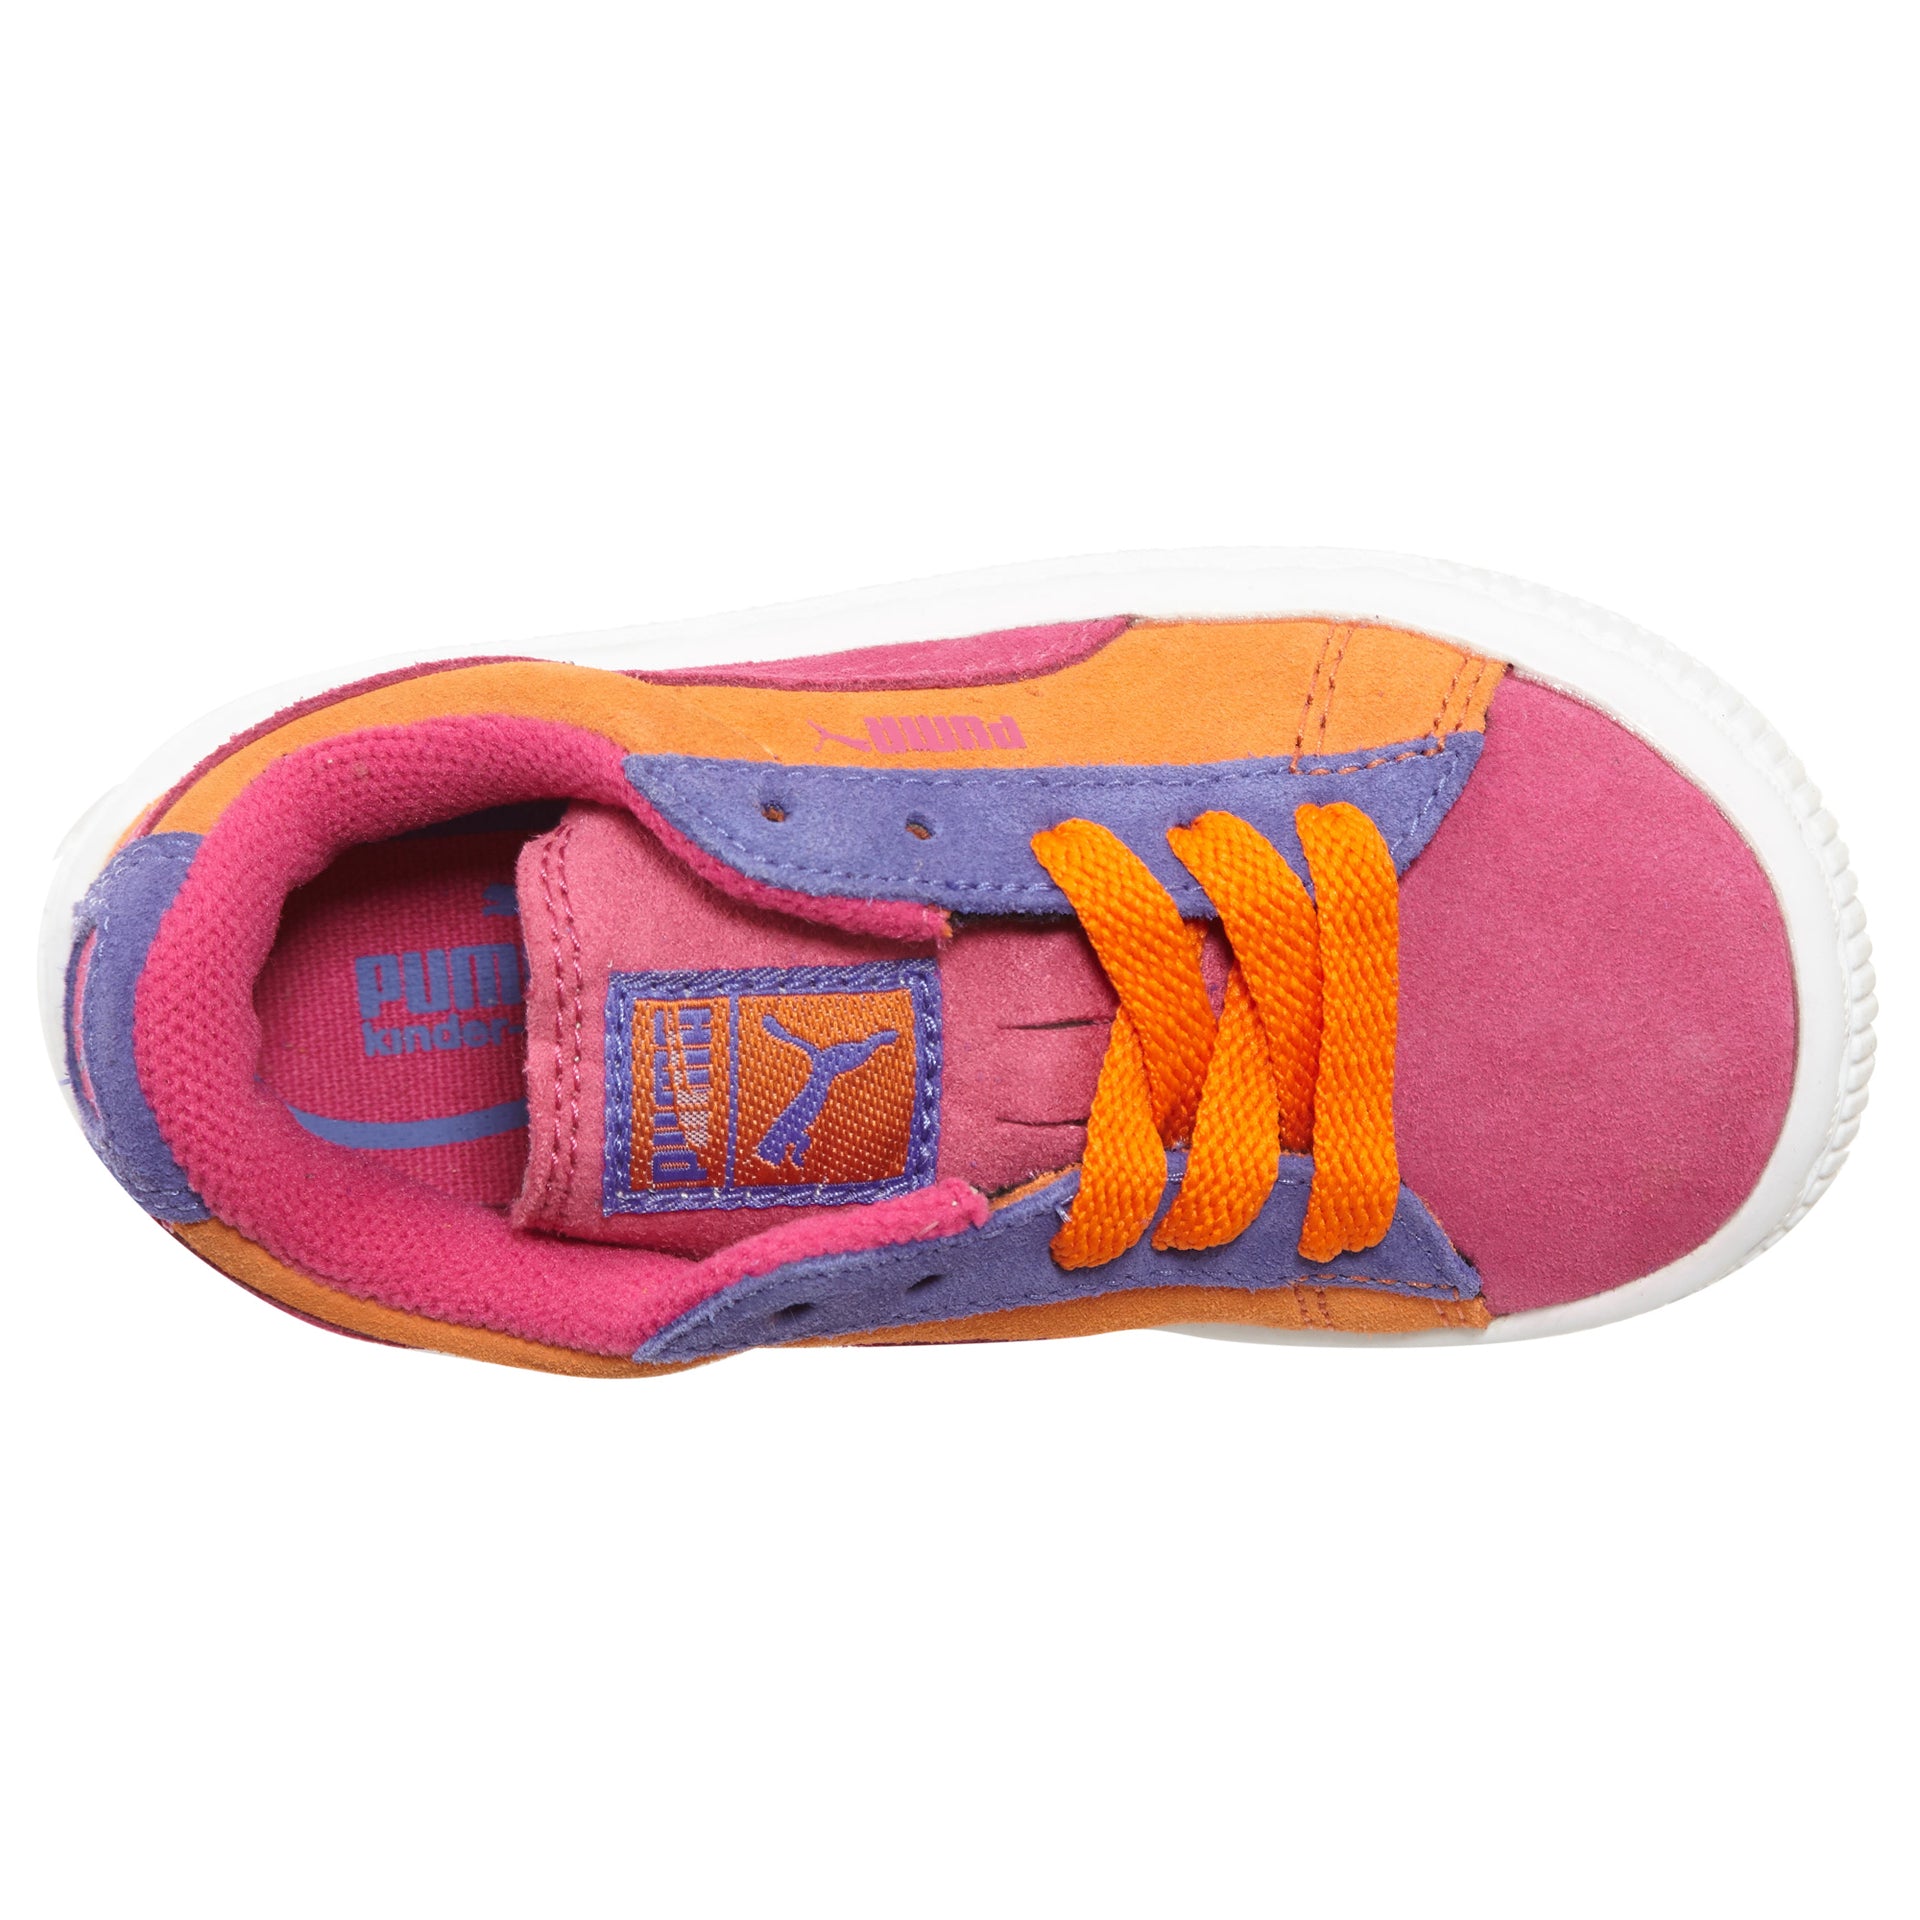 Puma Suede Sneaker Toddlers Style : 353636